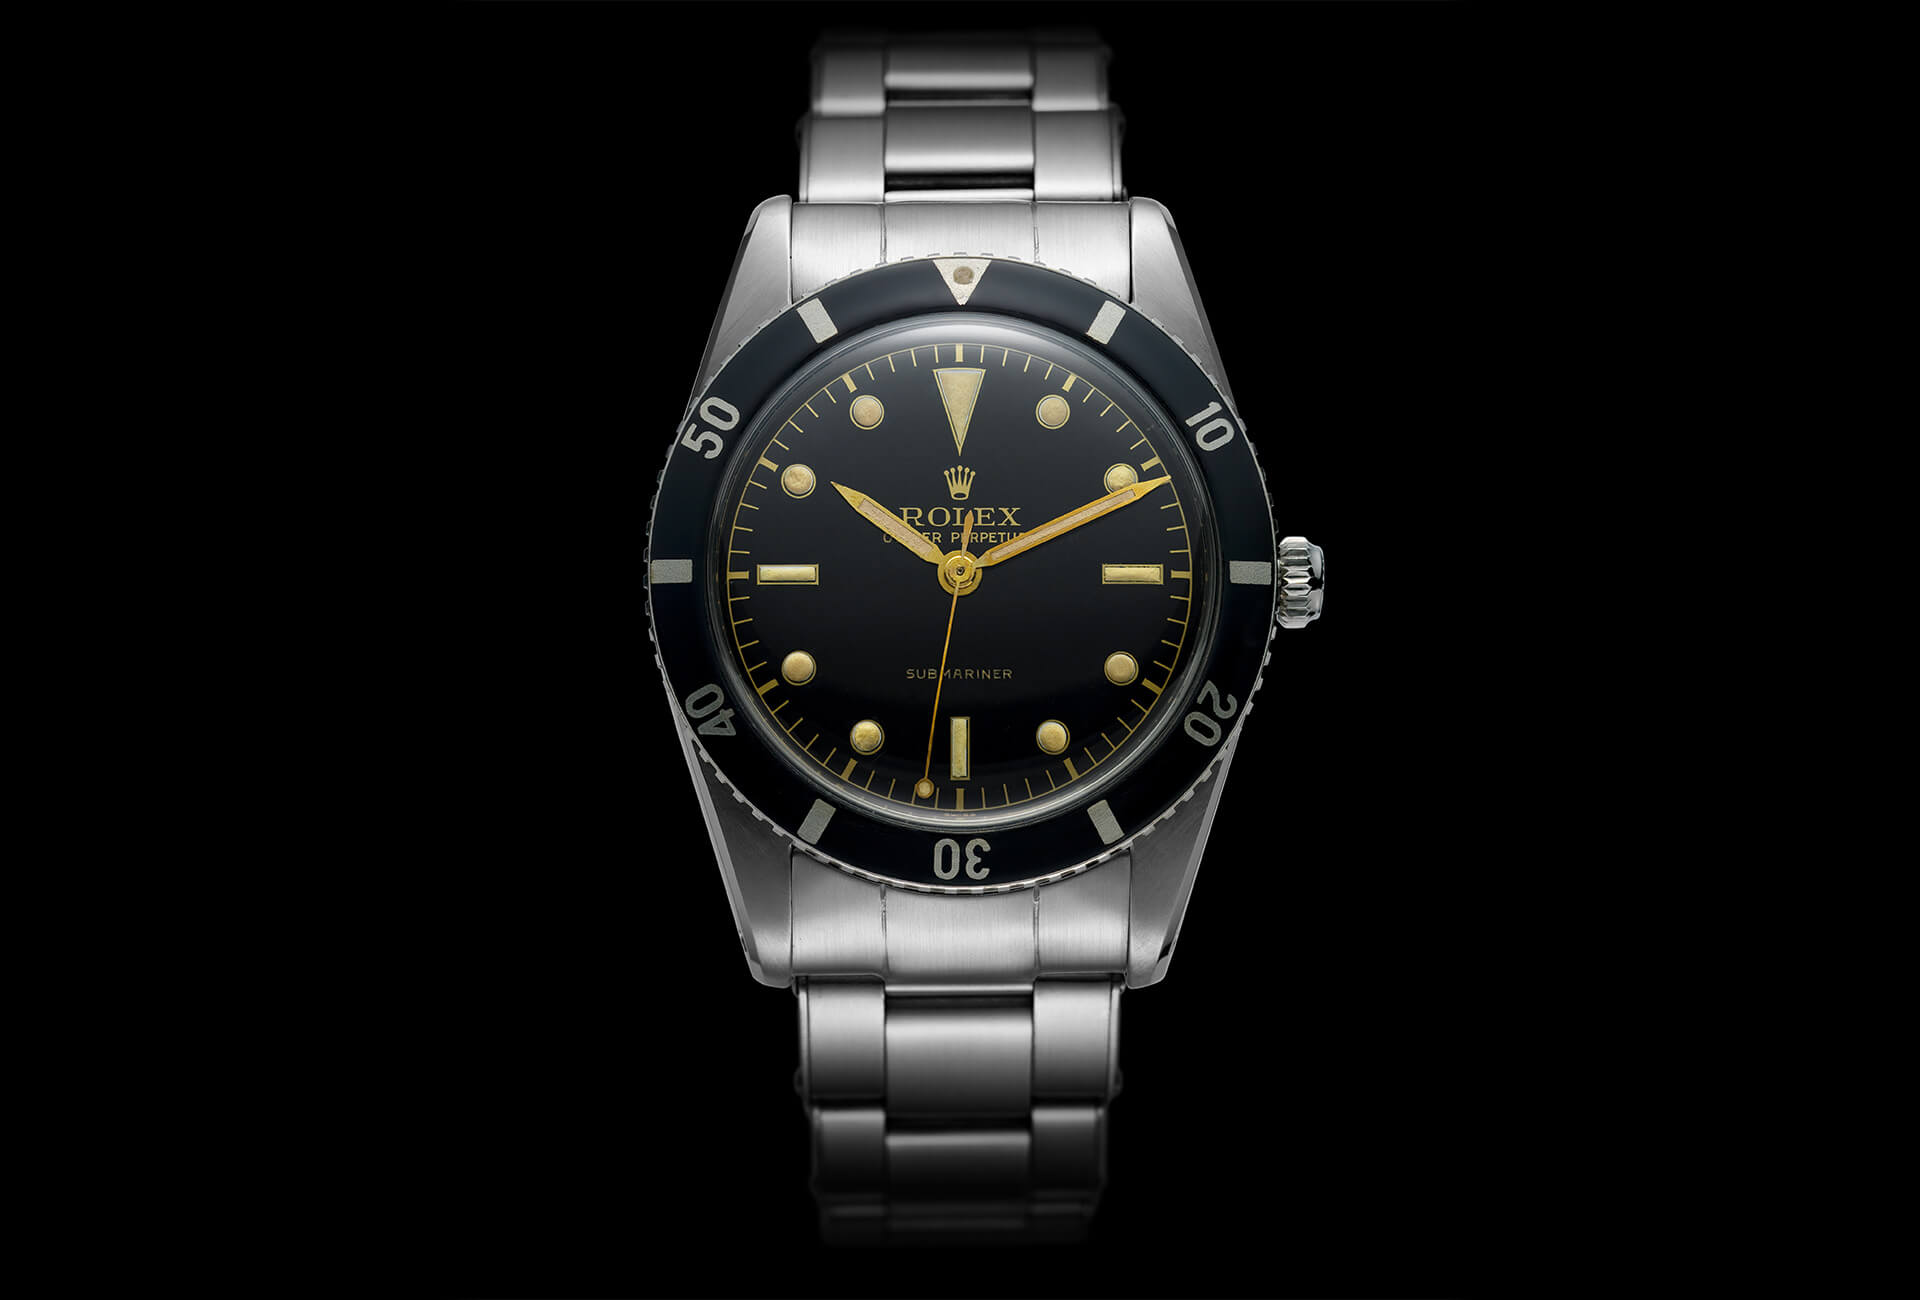 Why is the Rolex Submariner so popular 